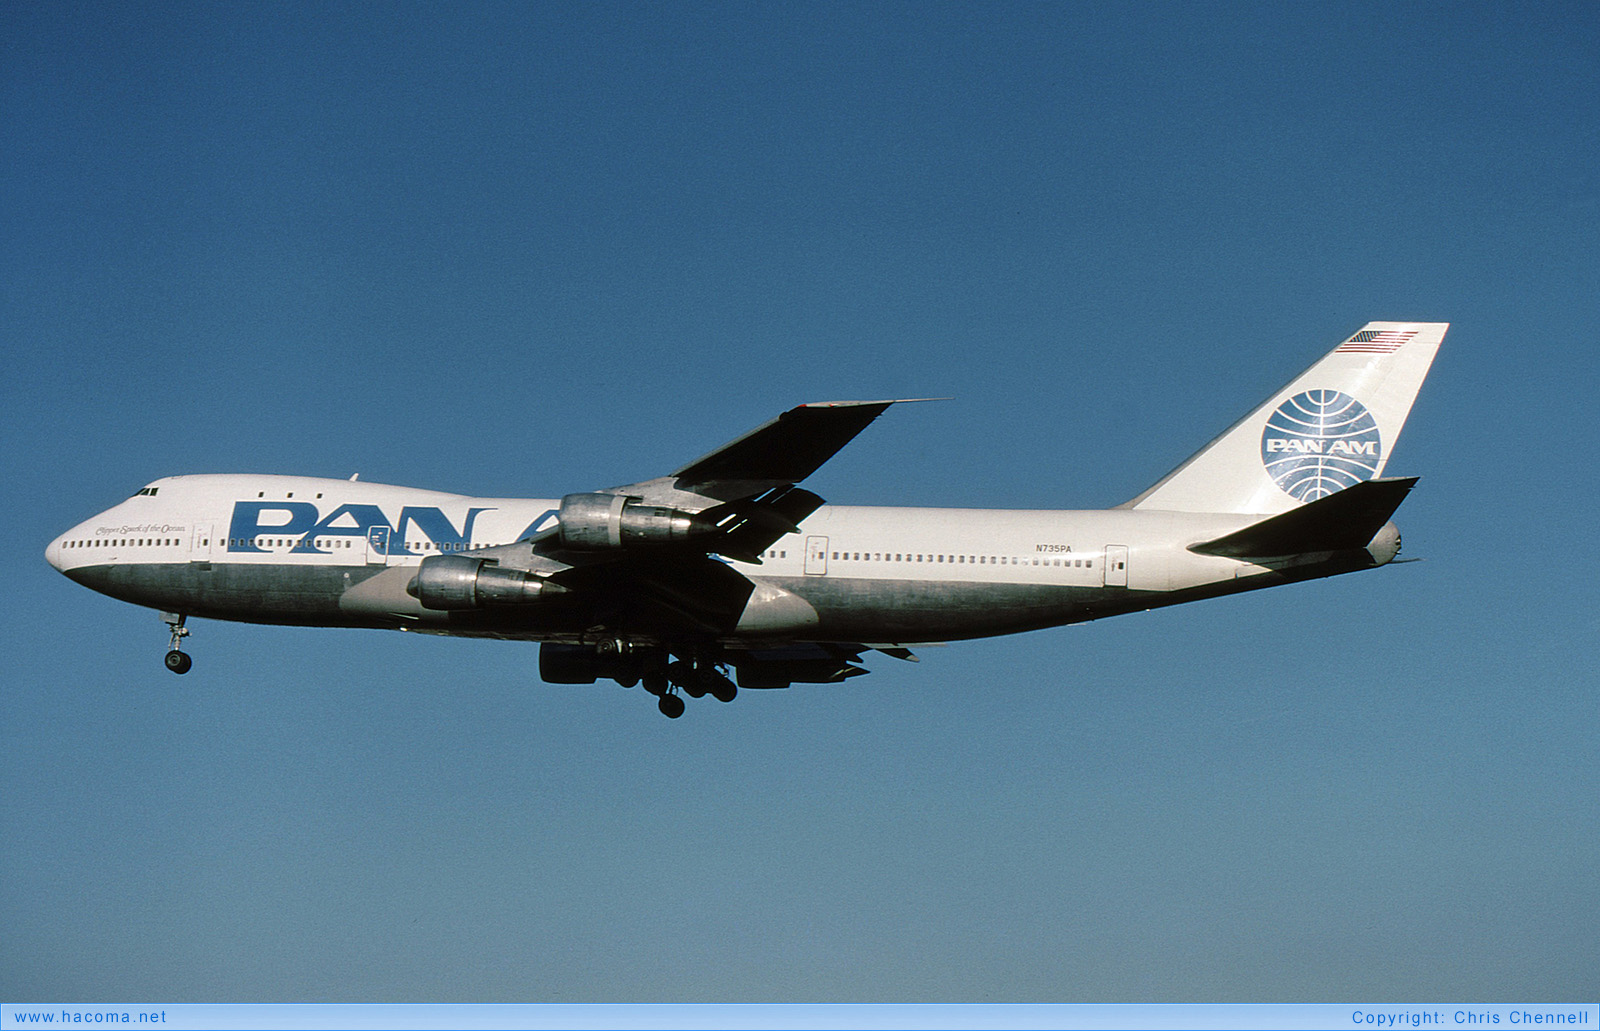 Foto von N735PA - Pan Am Clipper Constitution / Young America / Spark of the Ocean - London Heathrow Airport - 12.01.1991